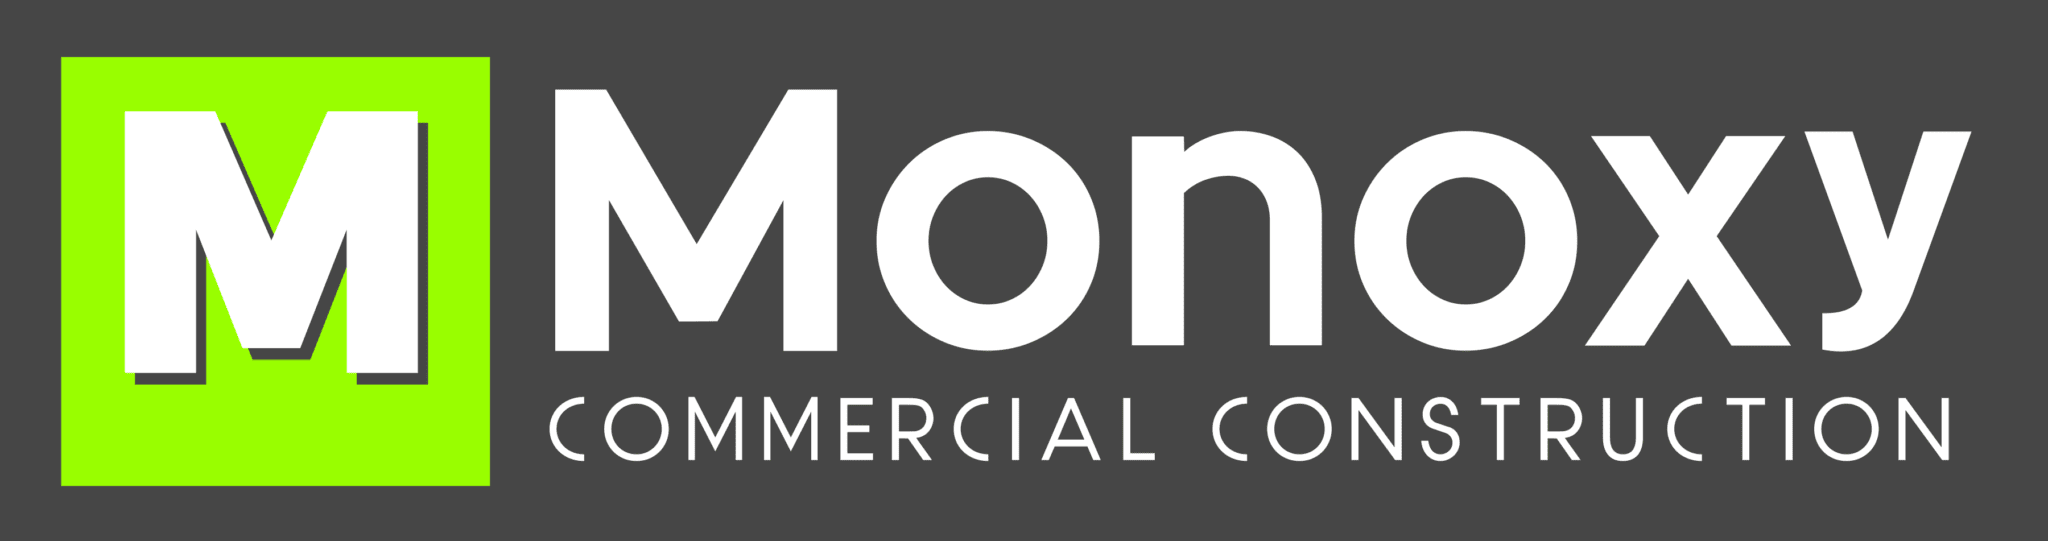 Monoxy Construction Offers Design And Construction Services Across The DFW Metroplex